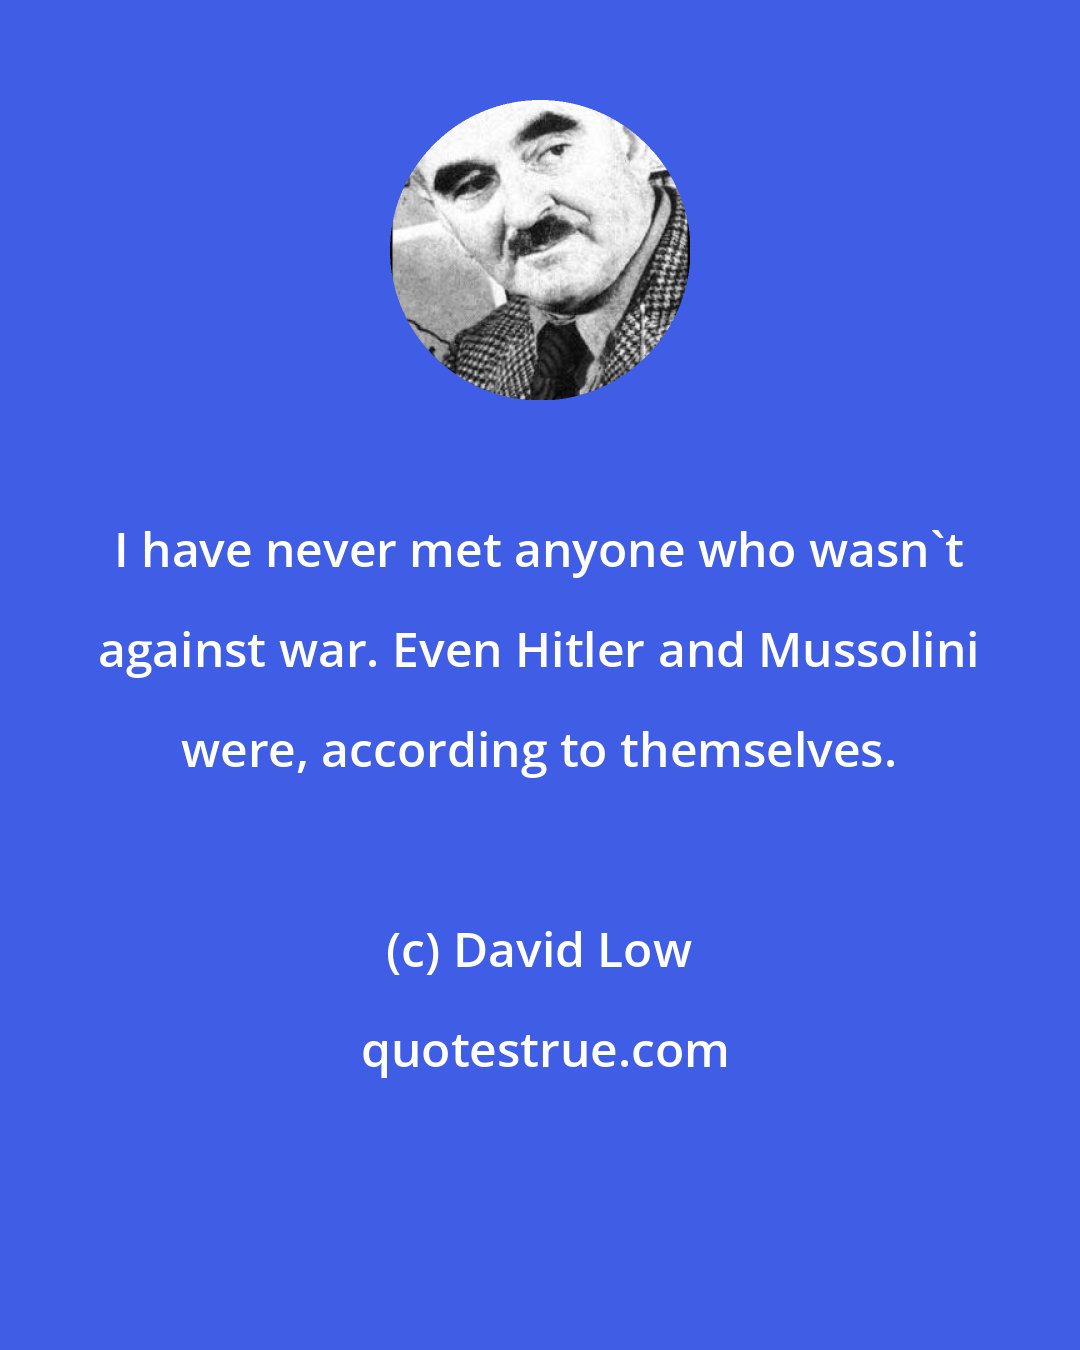 David Low: I have never met anyone who wasn't against war. Even Hitler and Mussolini were, according to themselves.